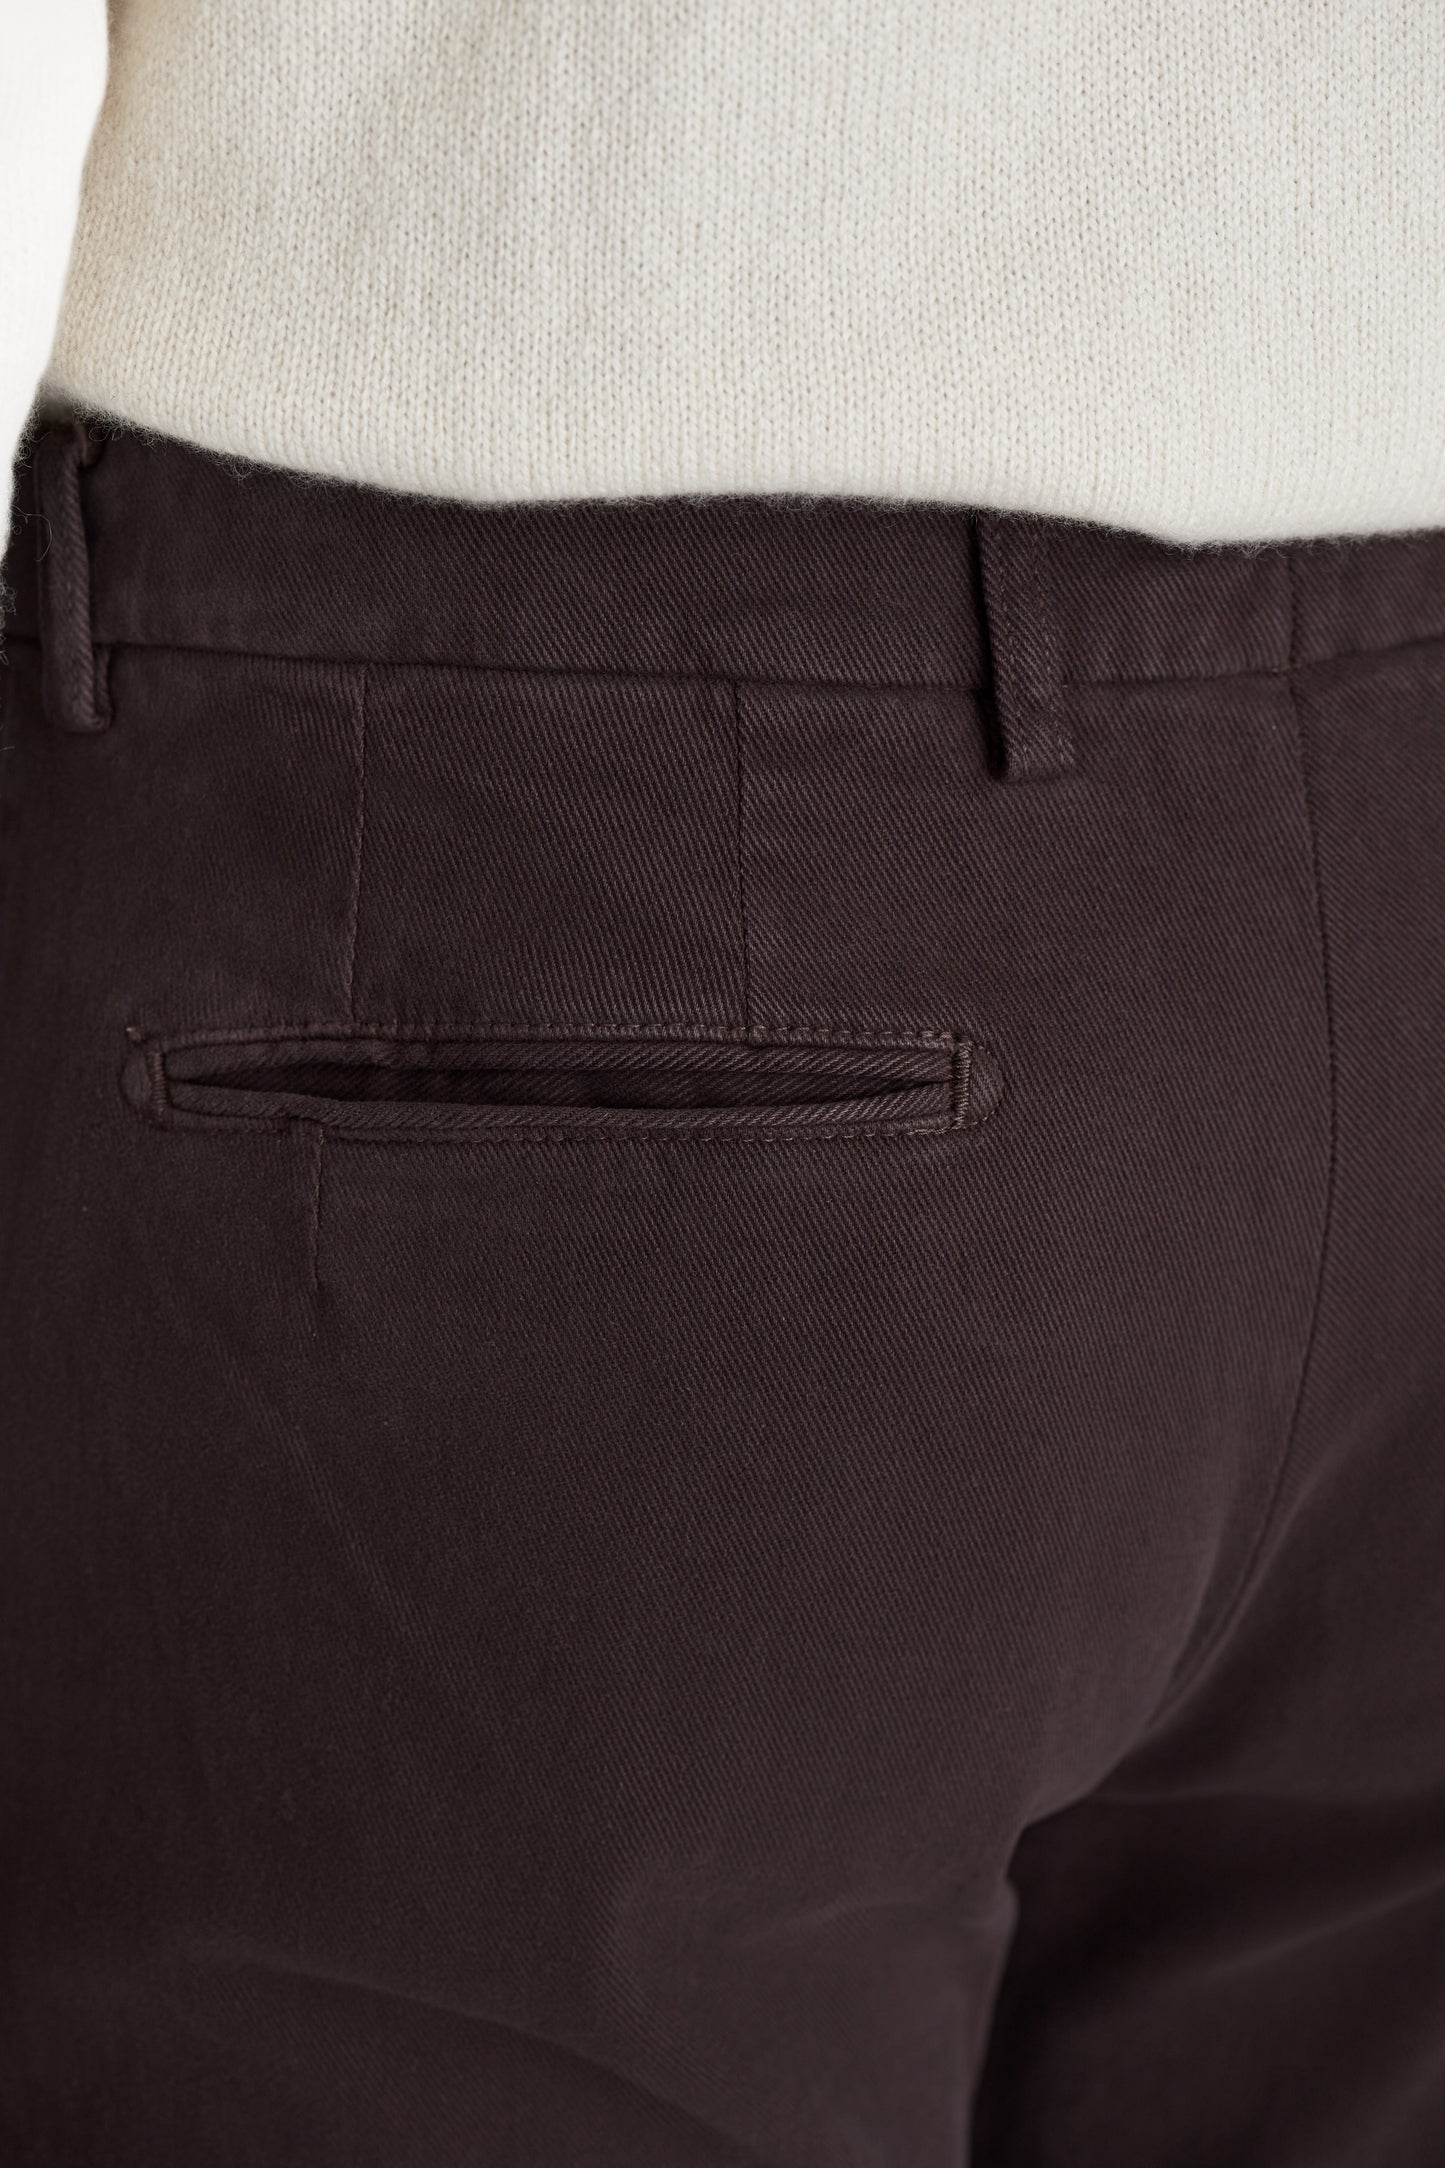 Cotton Single Pleat Chinos Brown Model Back Pocket Image